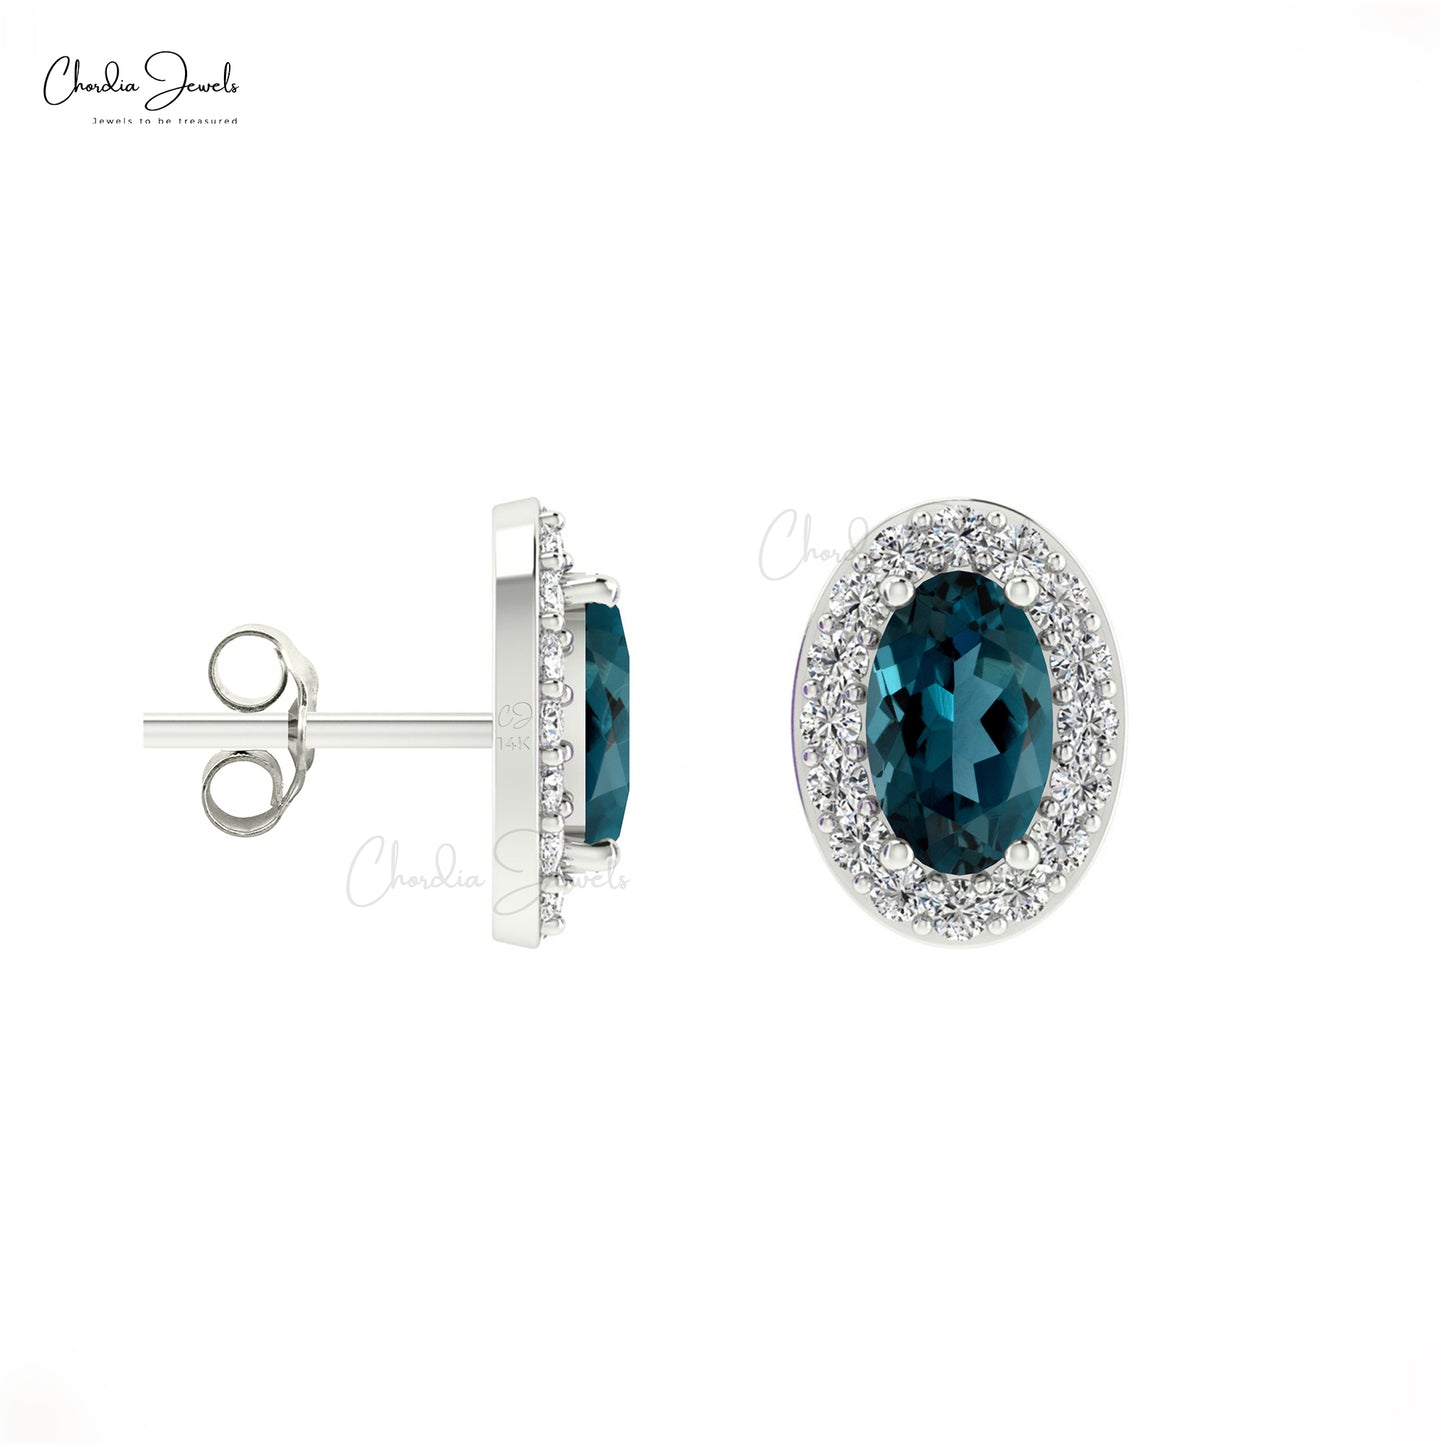 Solid 14k Gold Diamond Halo Earrings Authentic 5x3mm London Blue Topaz Studs For Wedding Gift